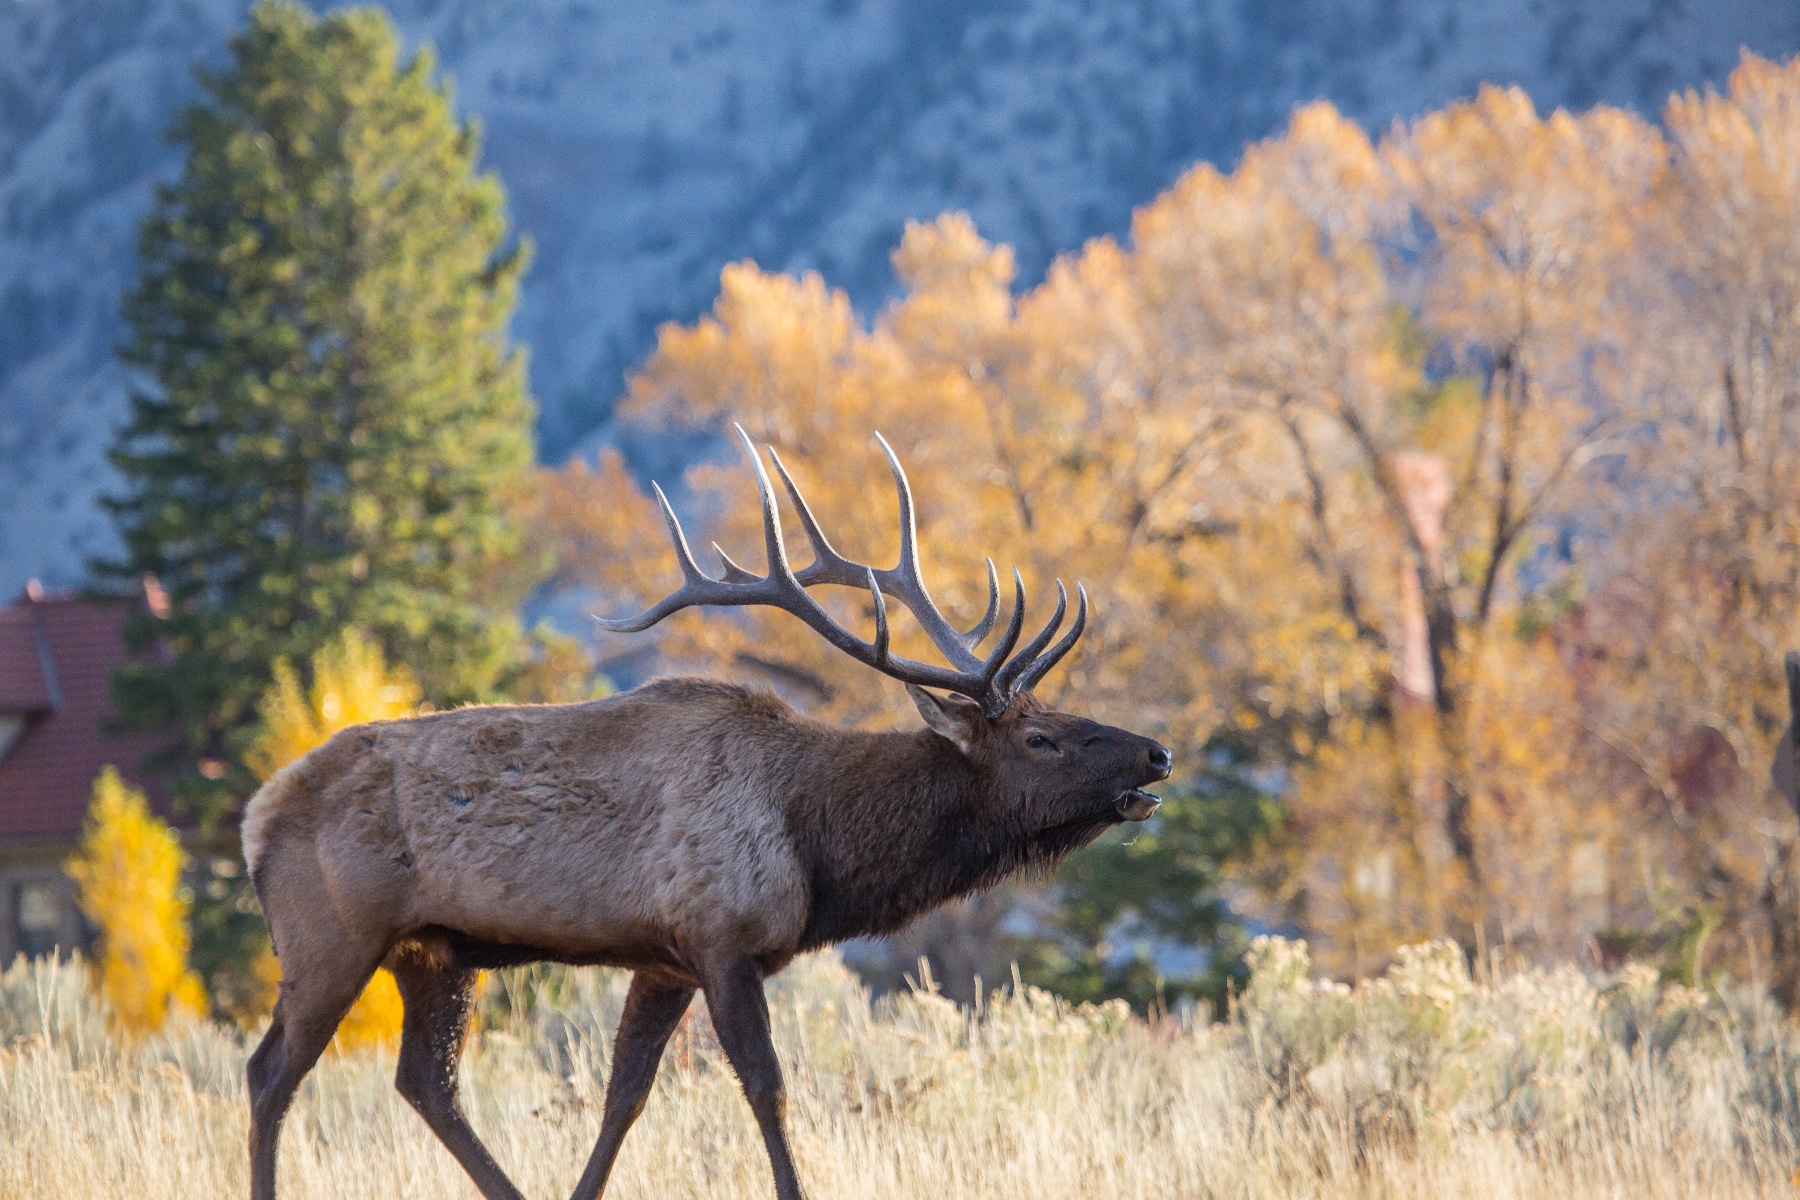 Yellowstone in the fall is known for the elk rut.